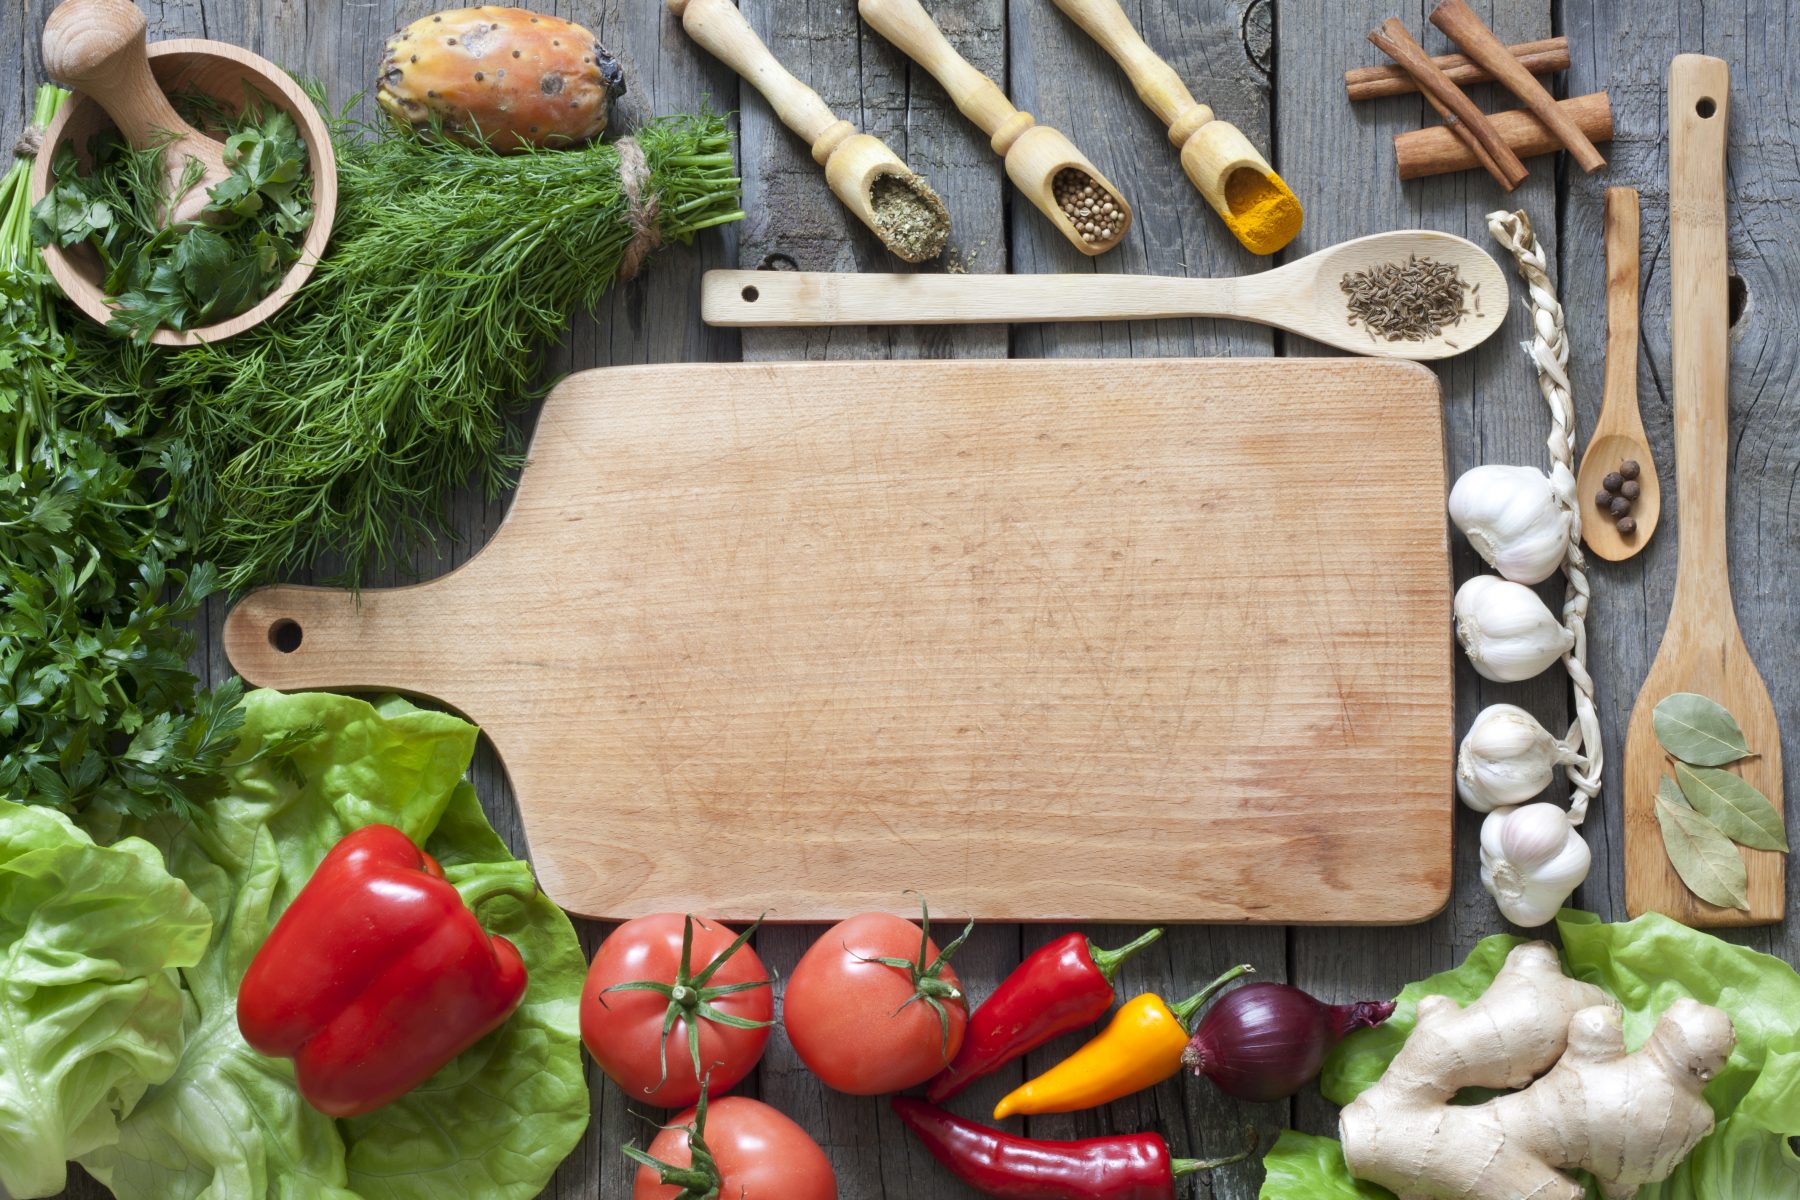 Cutting board surrounded by healthy food and herbs